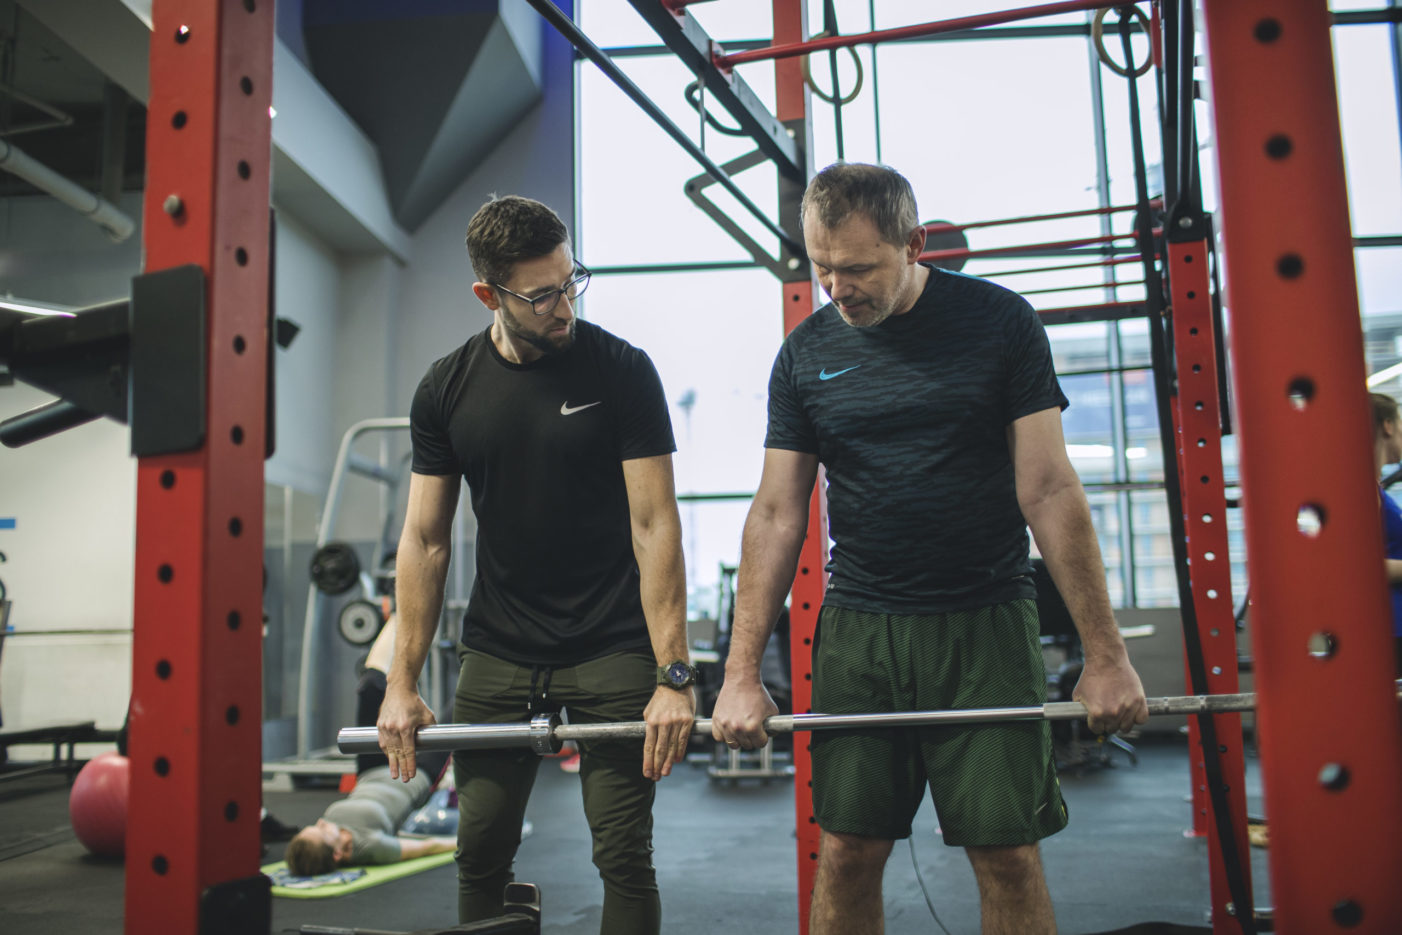 HOW TO PREPARE FOR PERSONAL TRAINING?